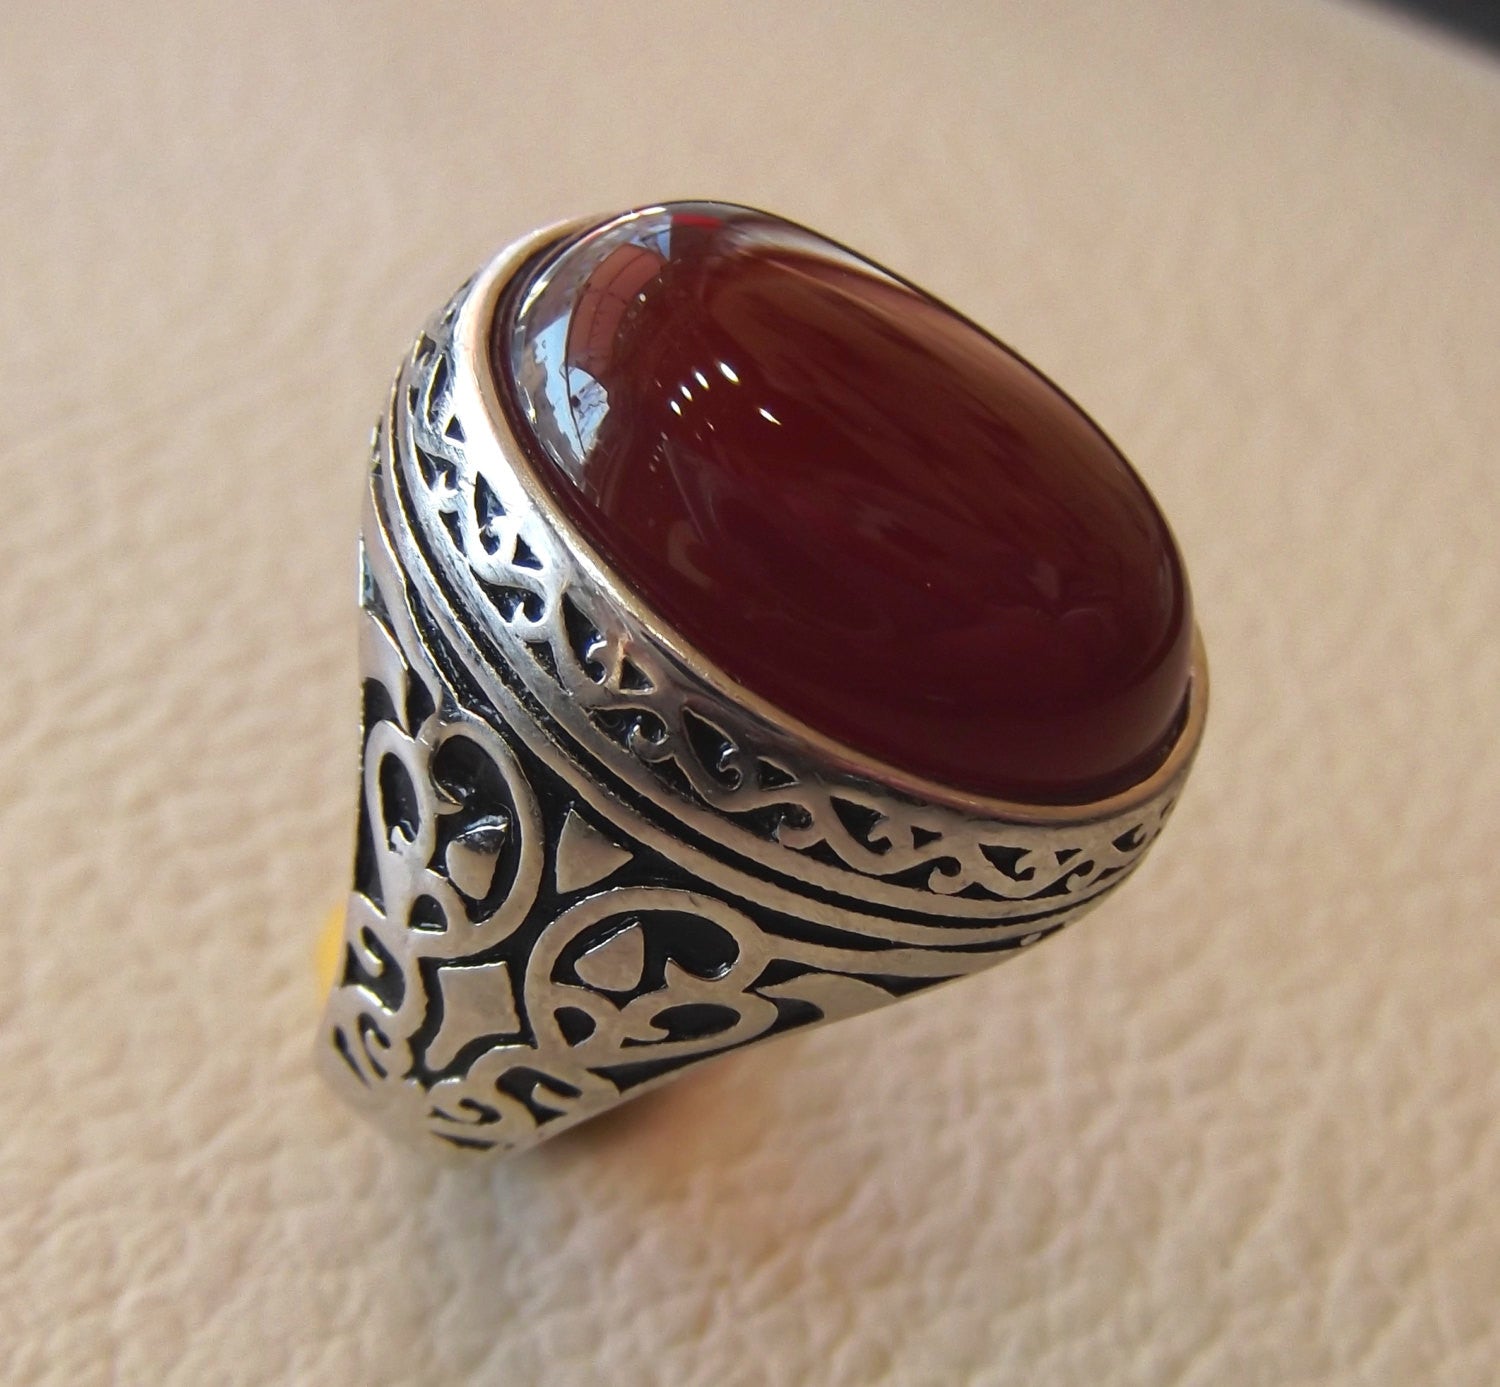 aqeeq natural liver agate carnelian semi precious stone oval red cabochon gem man ring sterling silver arabic middle eastern turkey style